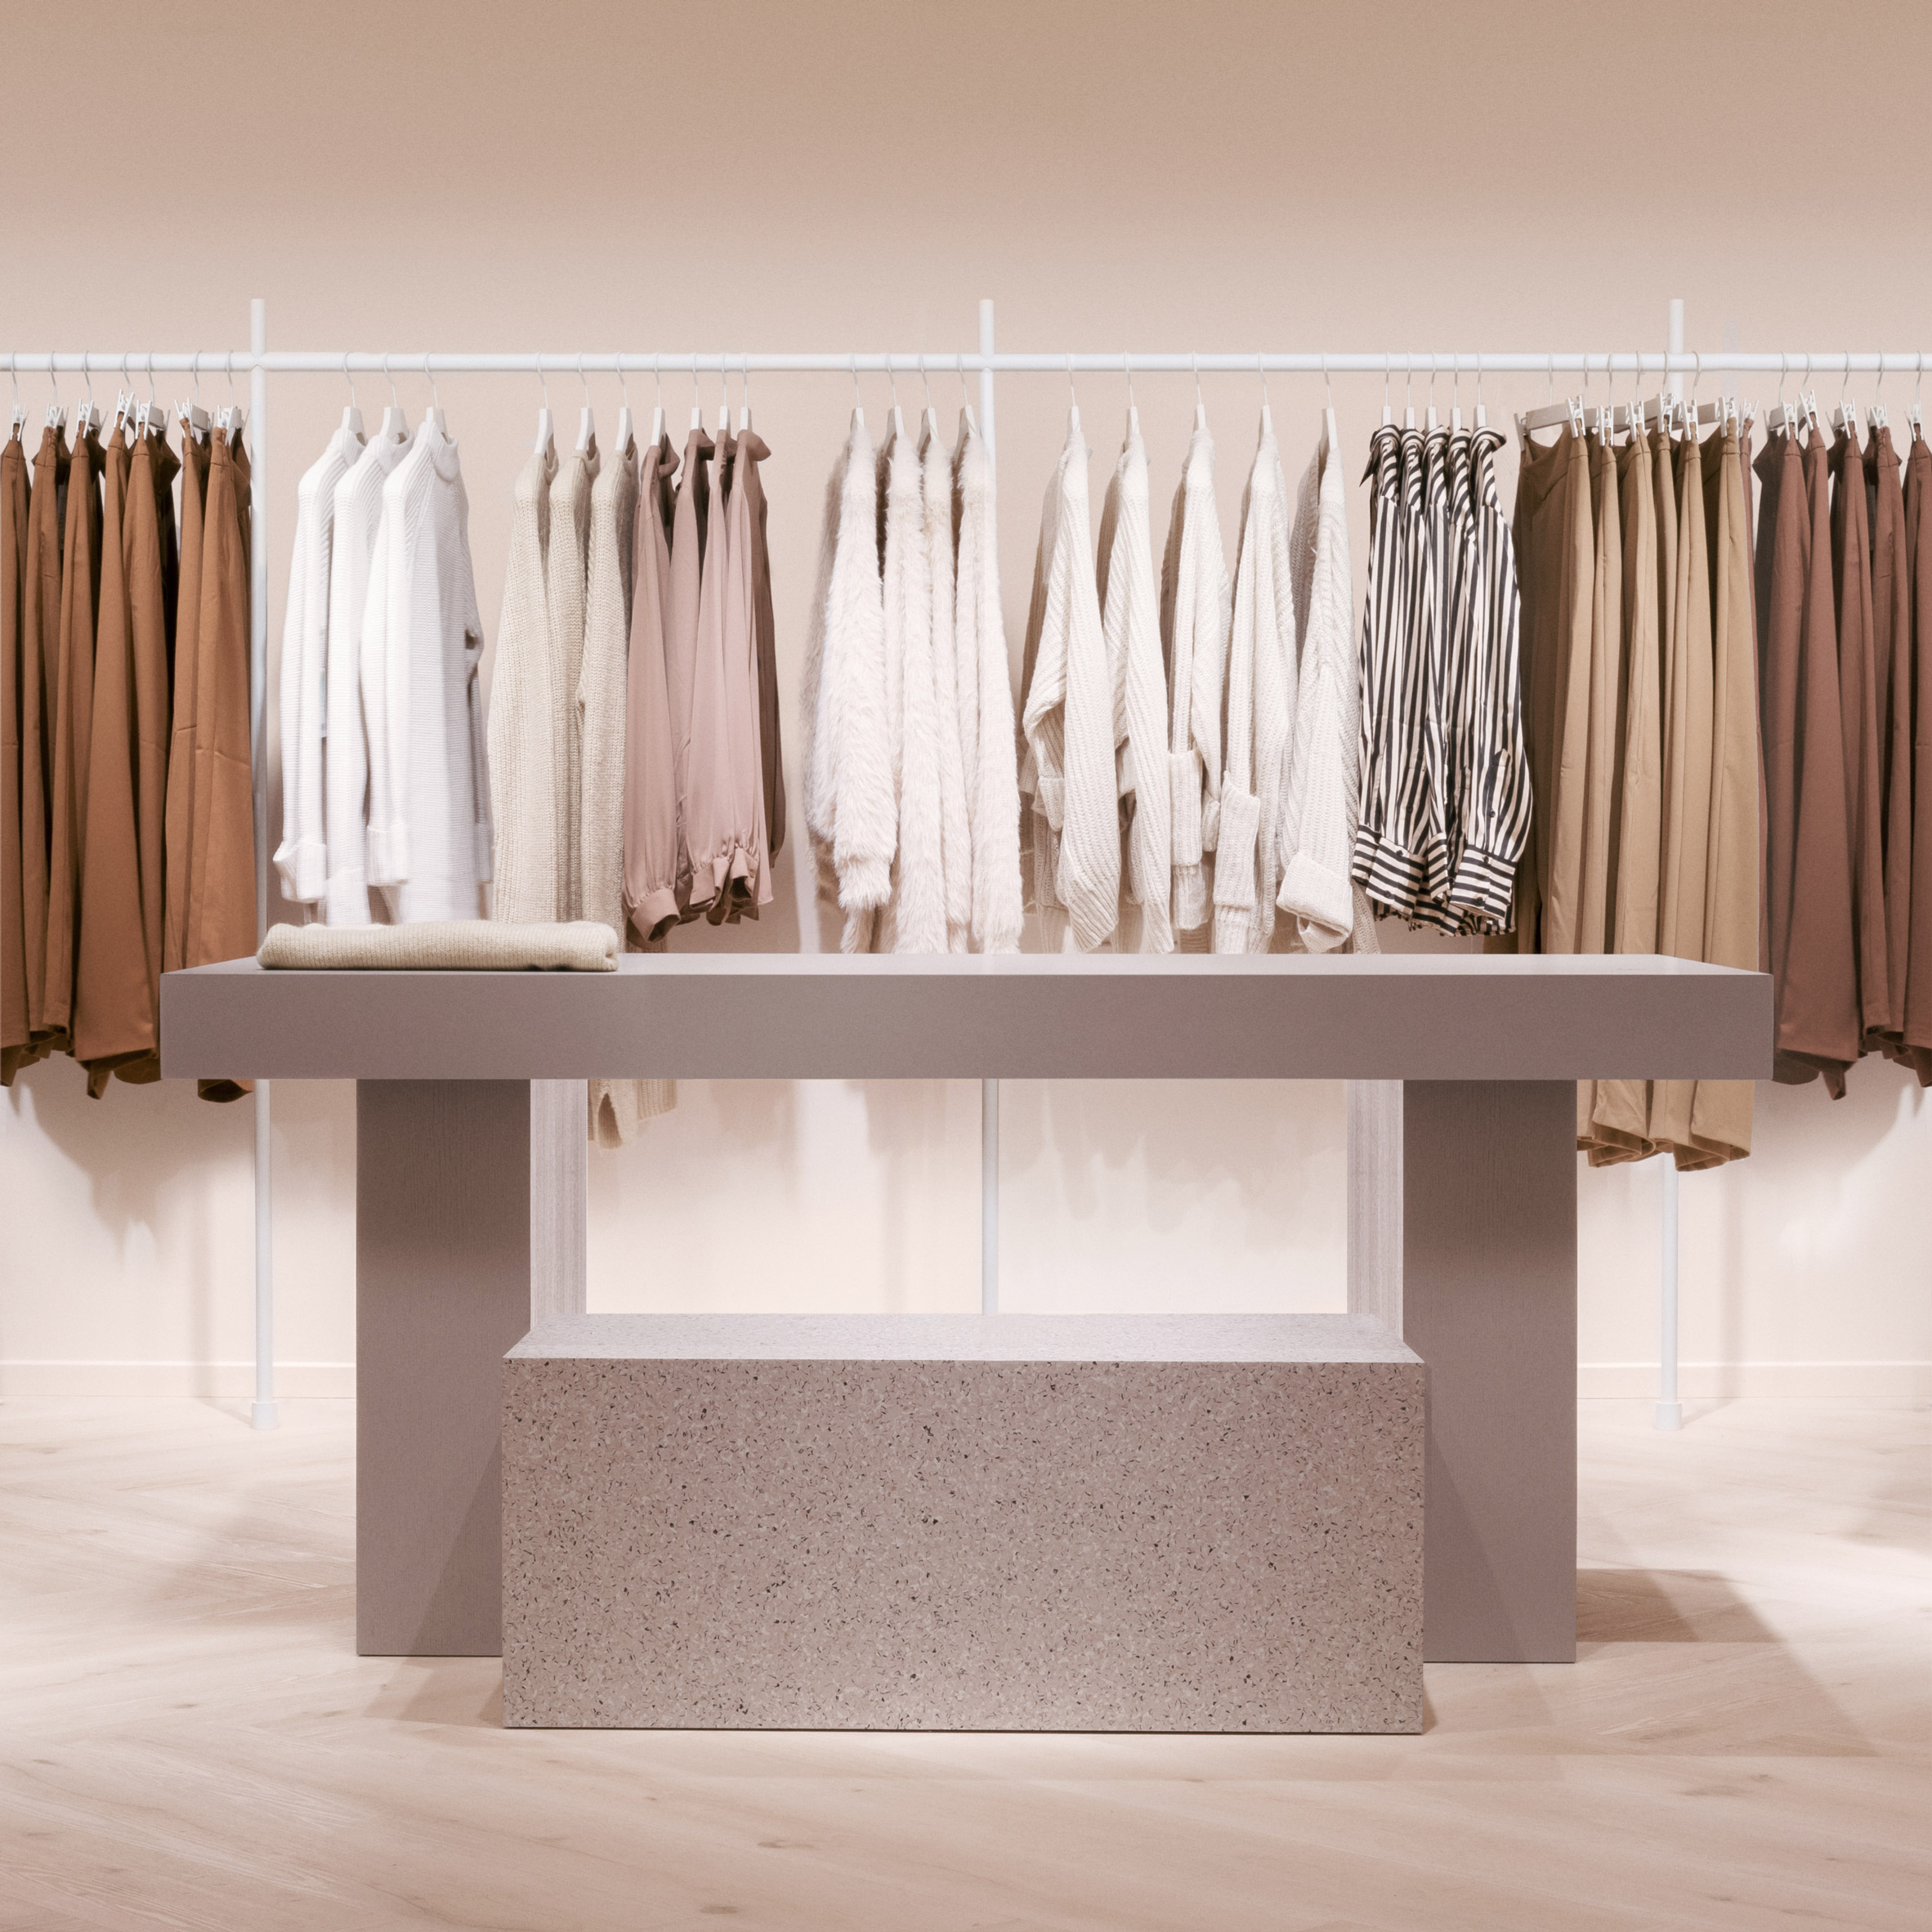 Stockholm travel guide: Gina Tricot store by Note Design Studio